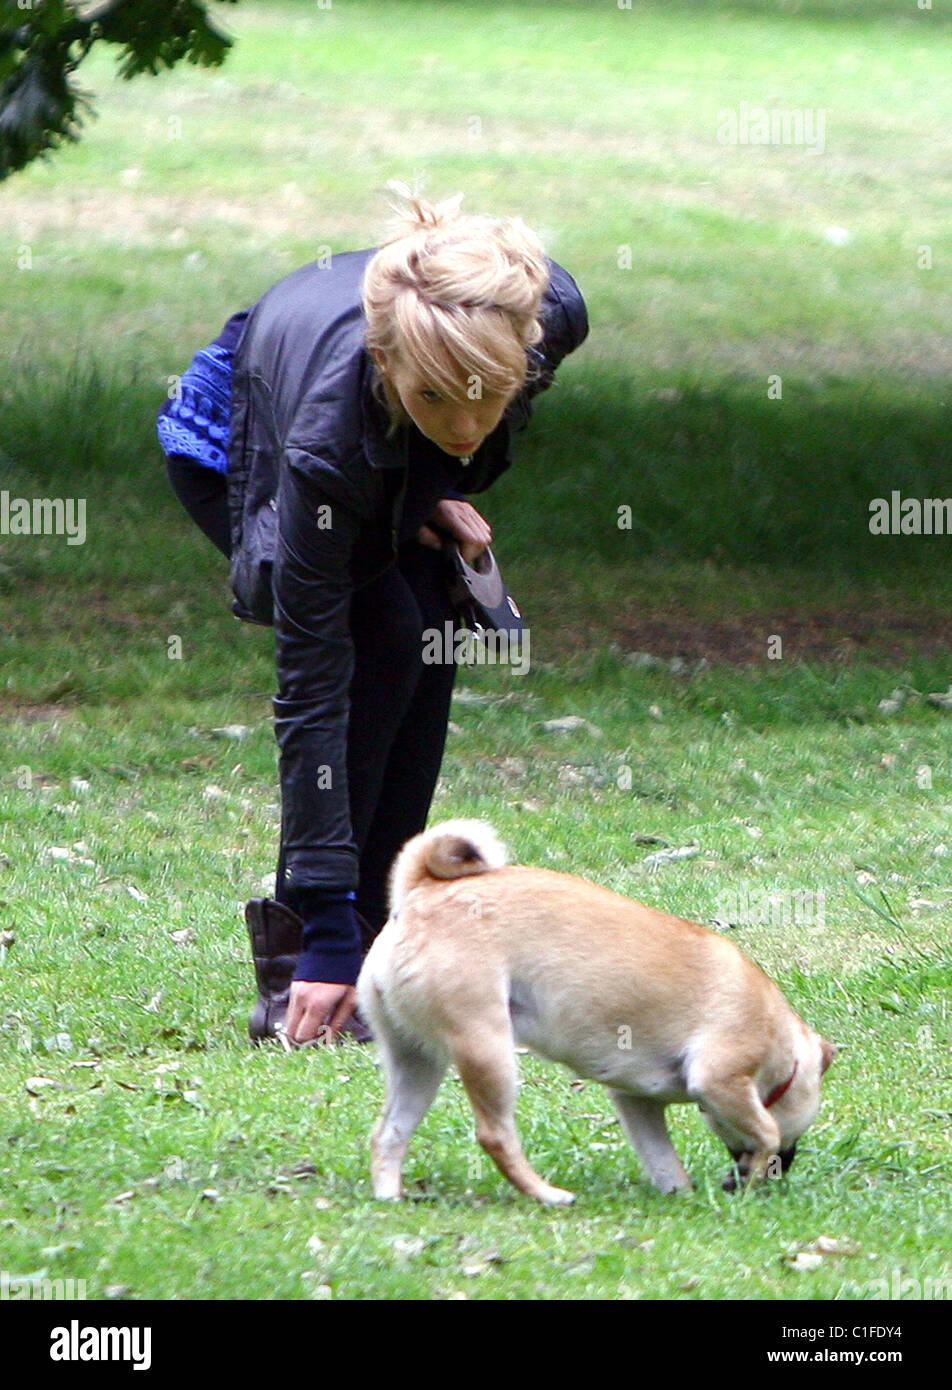 Ekaterina Ivanova plays with her dog in the park London, England - 14.05.09 Stock Photo